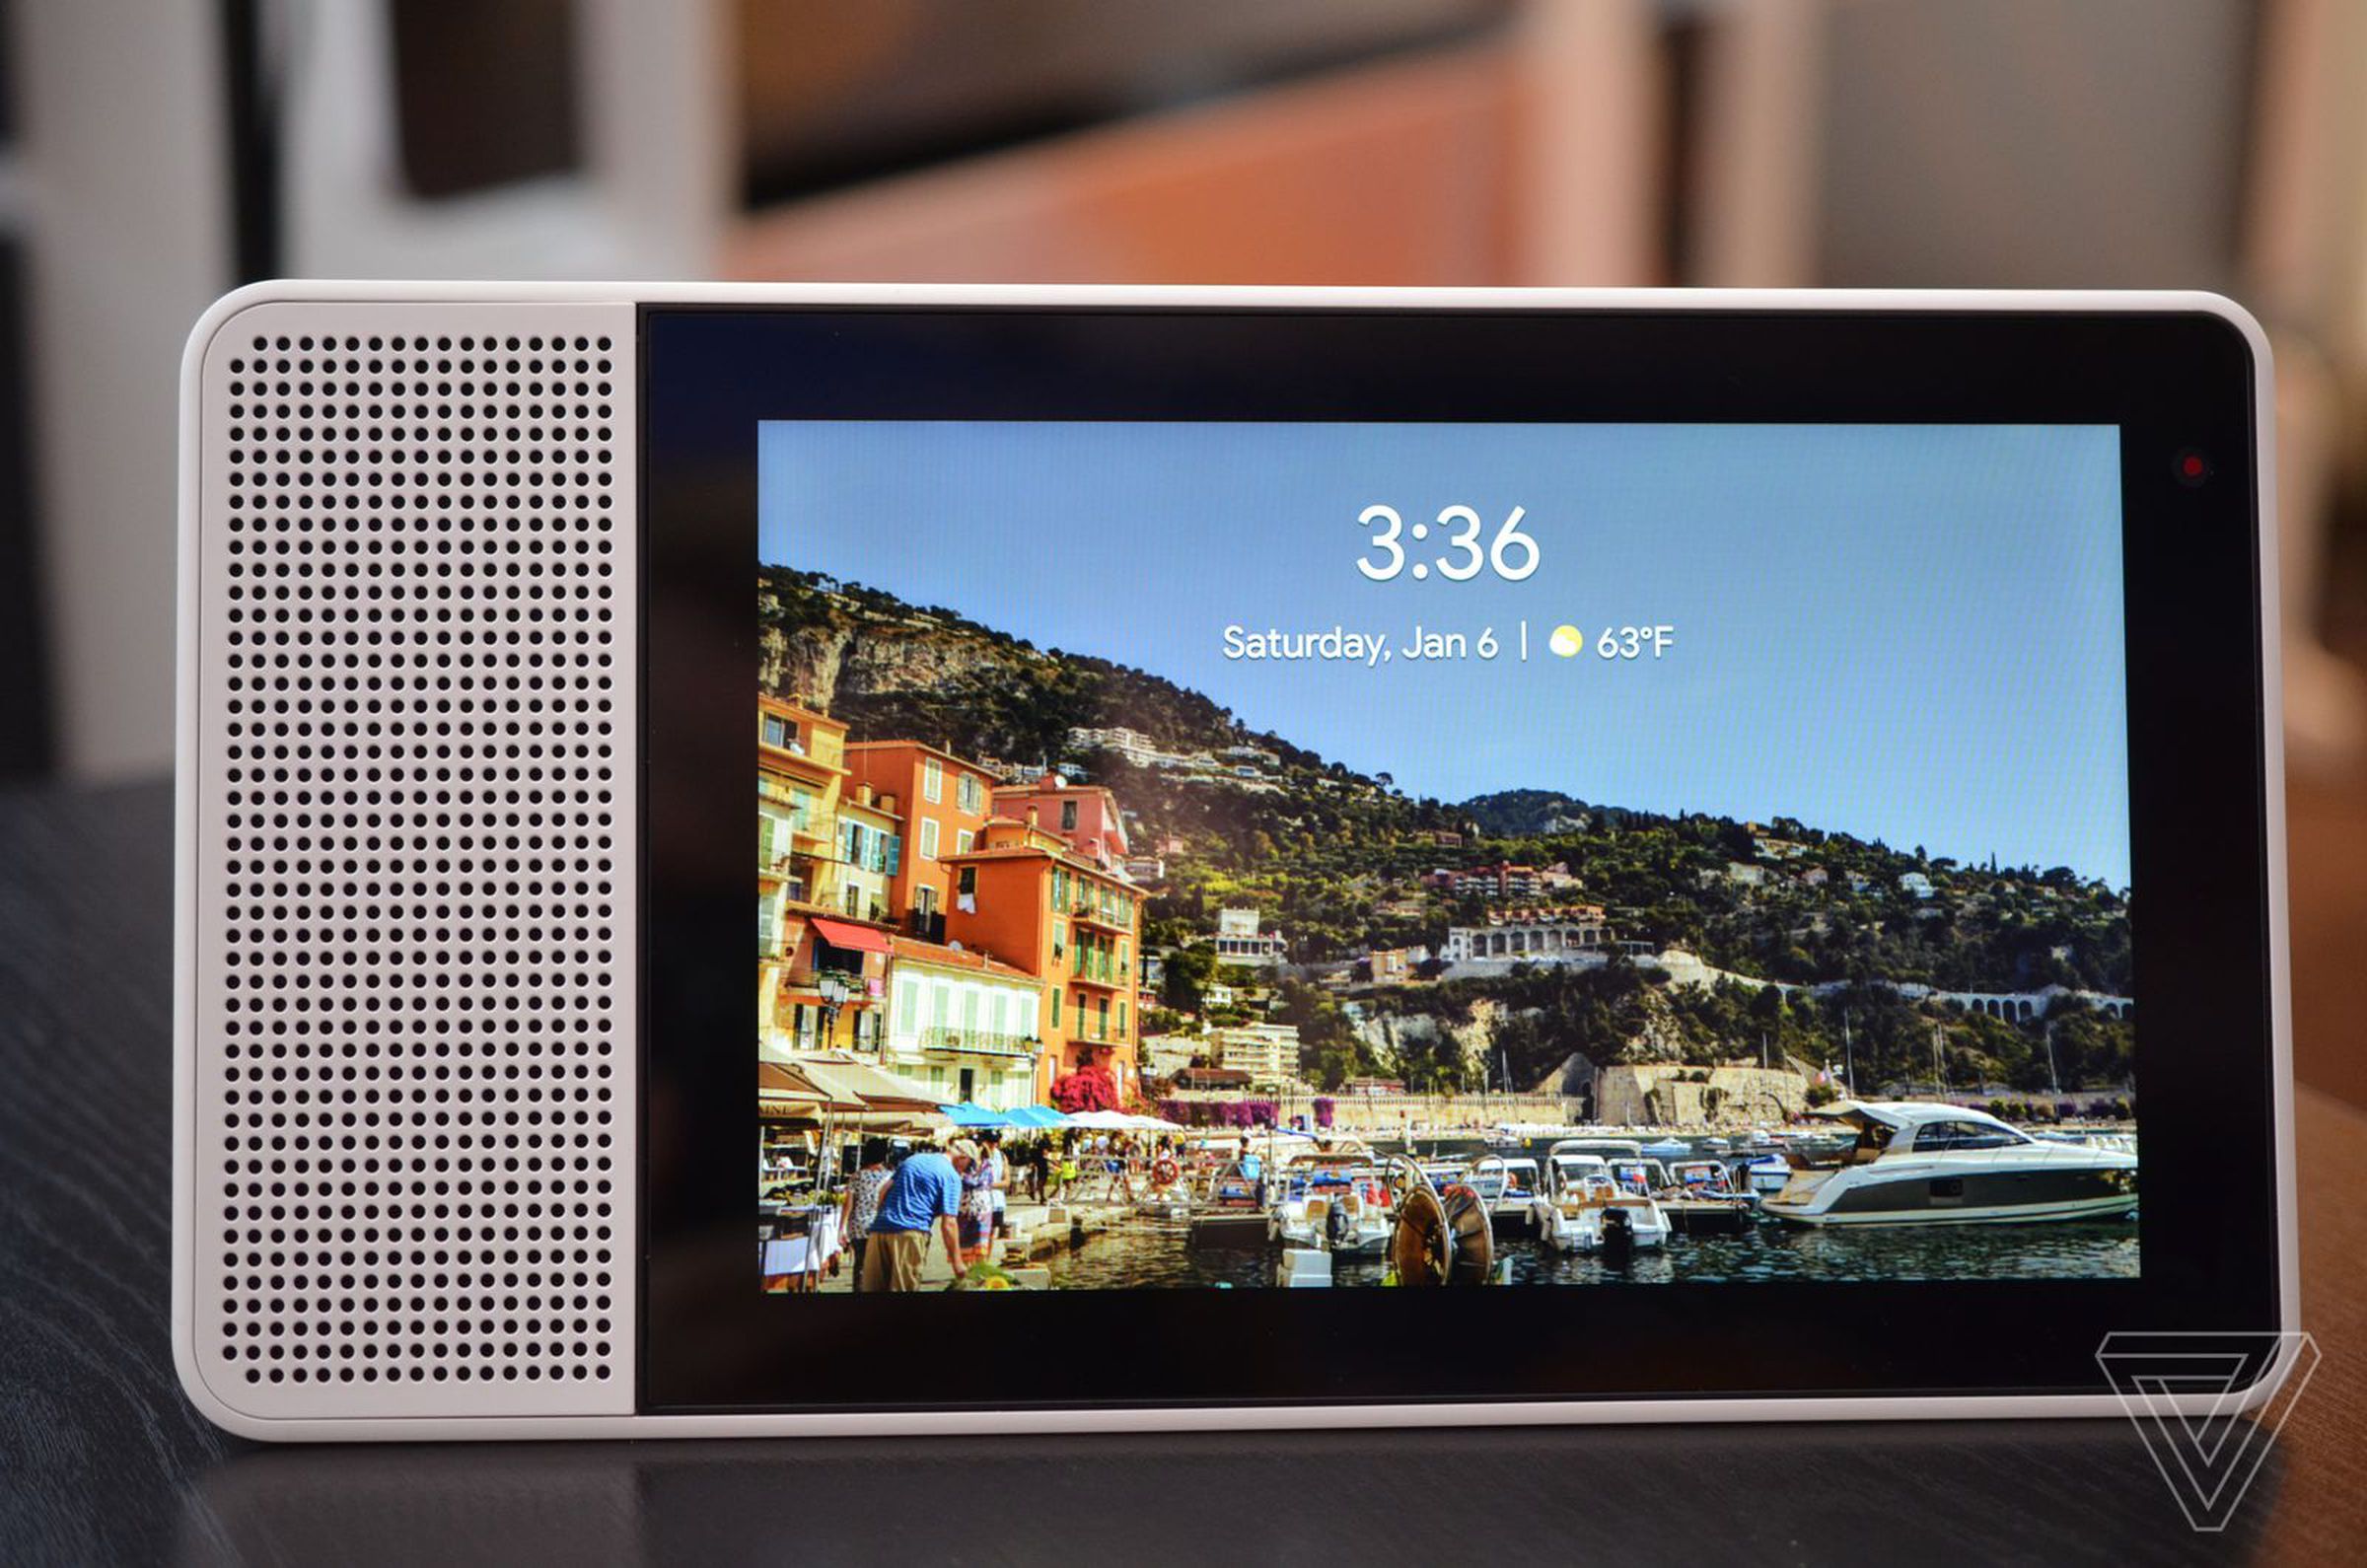 You’ll be seeing more and more Google Assistant speakers with displays over the next few months. 